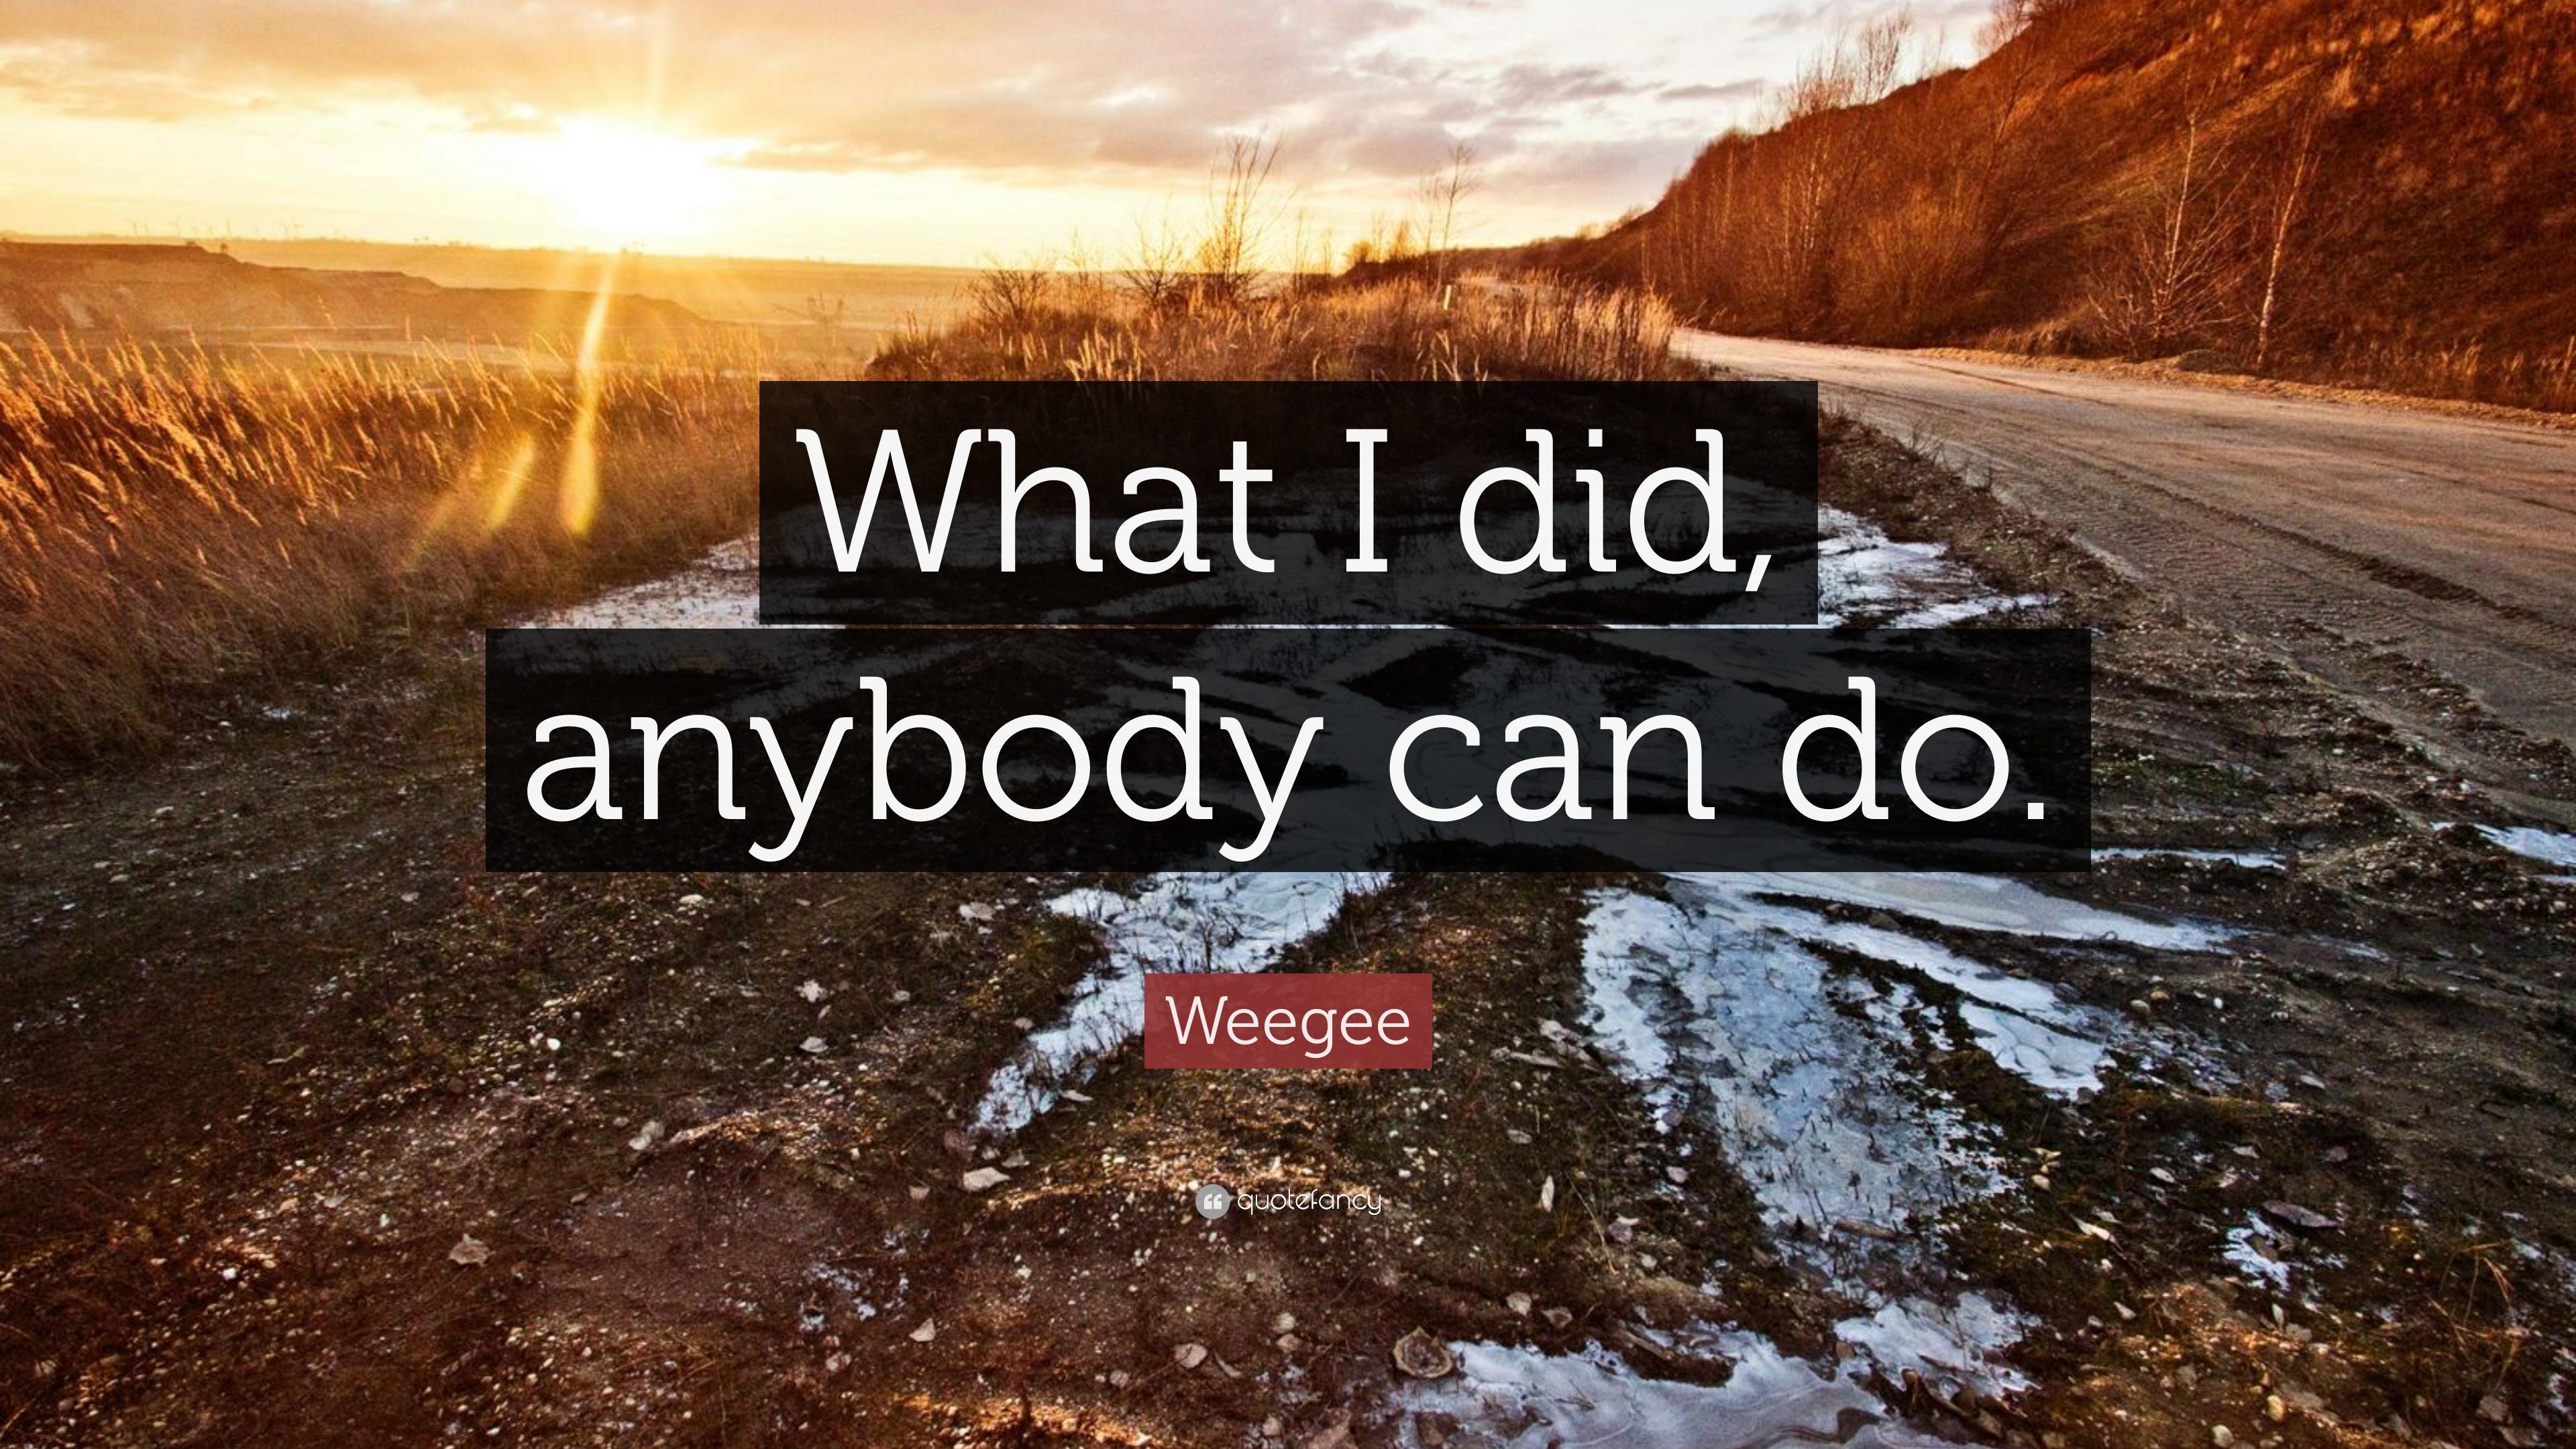 Weegee Quote: “What I did, anybody can do.” 7 wallpaper